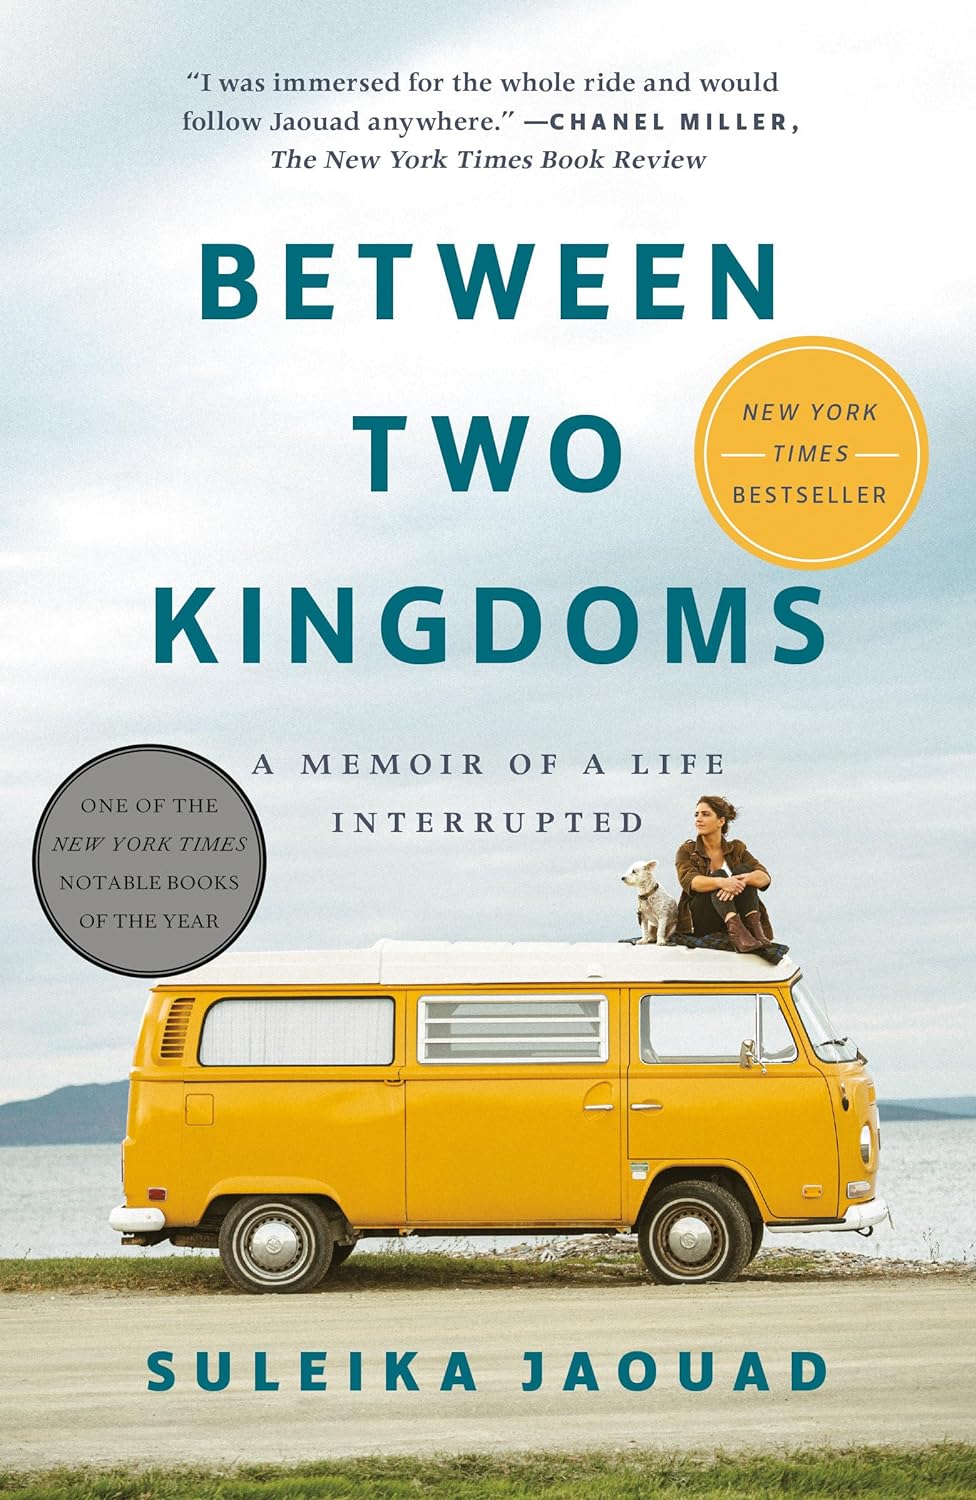 Between Two Kingdoms: A Memoir of a Life Interrupted - Suleika Jaouad